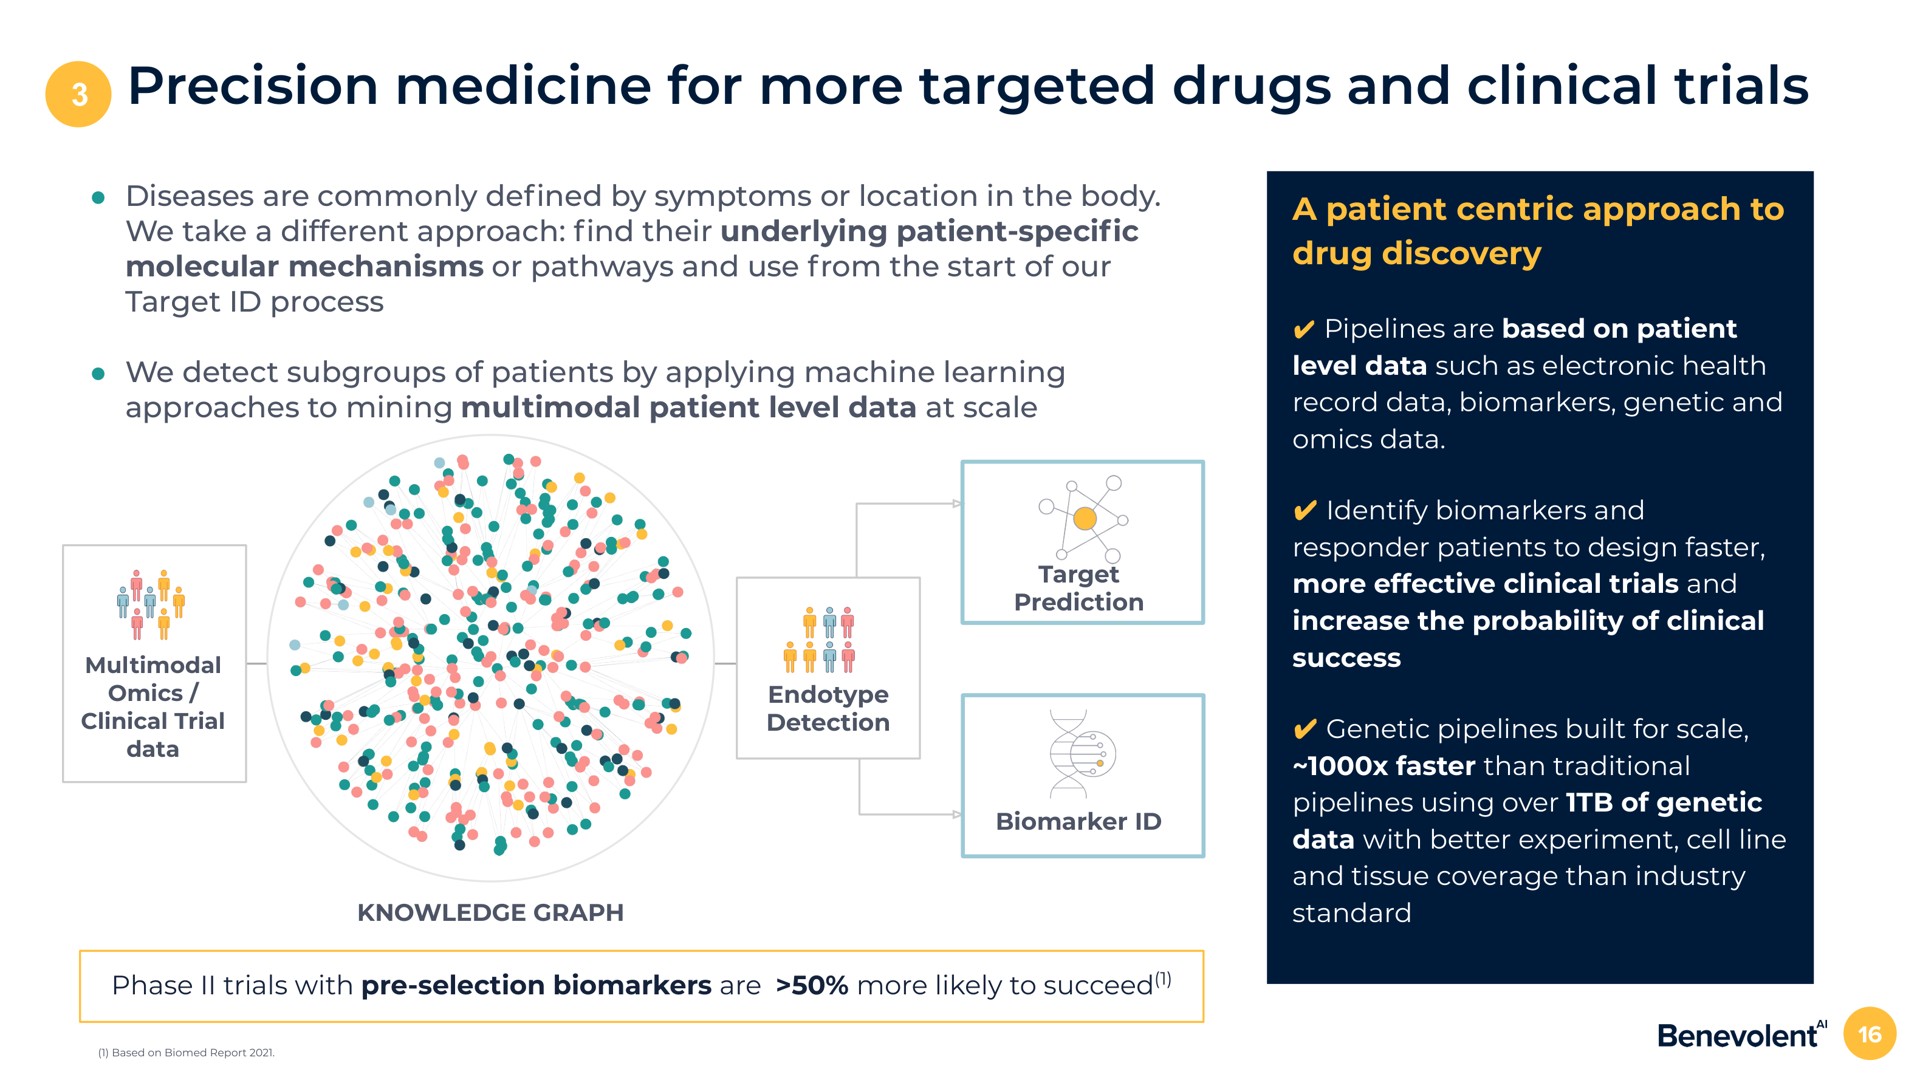 key required what truly differentiates approach precision medicine for more targeted drugs and clinical trials diseases are commonly by symptoms or location in the body we take a different approach their underlying patient molecular mechanisms or pathways and use from the start of our target process we detect subgroups of patients by applying machine learning approaches to mining multimodal patient level data at scale multimodal clinical trial data knowledge graph detection target prediction a patient centric approach to drug discovery pipelines are based on patient level data such as electronic health record data genetic and data identify and responder patients to design faster more effective clinical trials and increase the probability of clinical success genetic pipelines built for scale faster than traditional pipelines using over of genetic data with better experiment cell line and tissue coverage than industry standard phase trials with selection are more likely to succeed | BenevolentAI